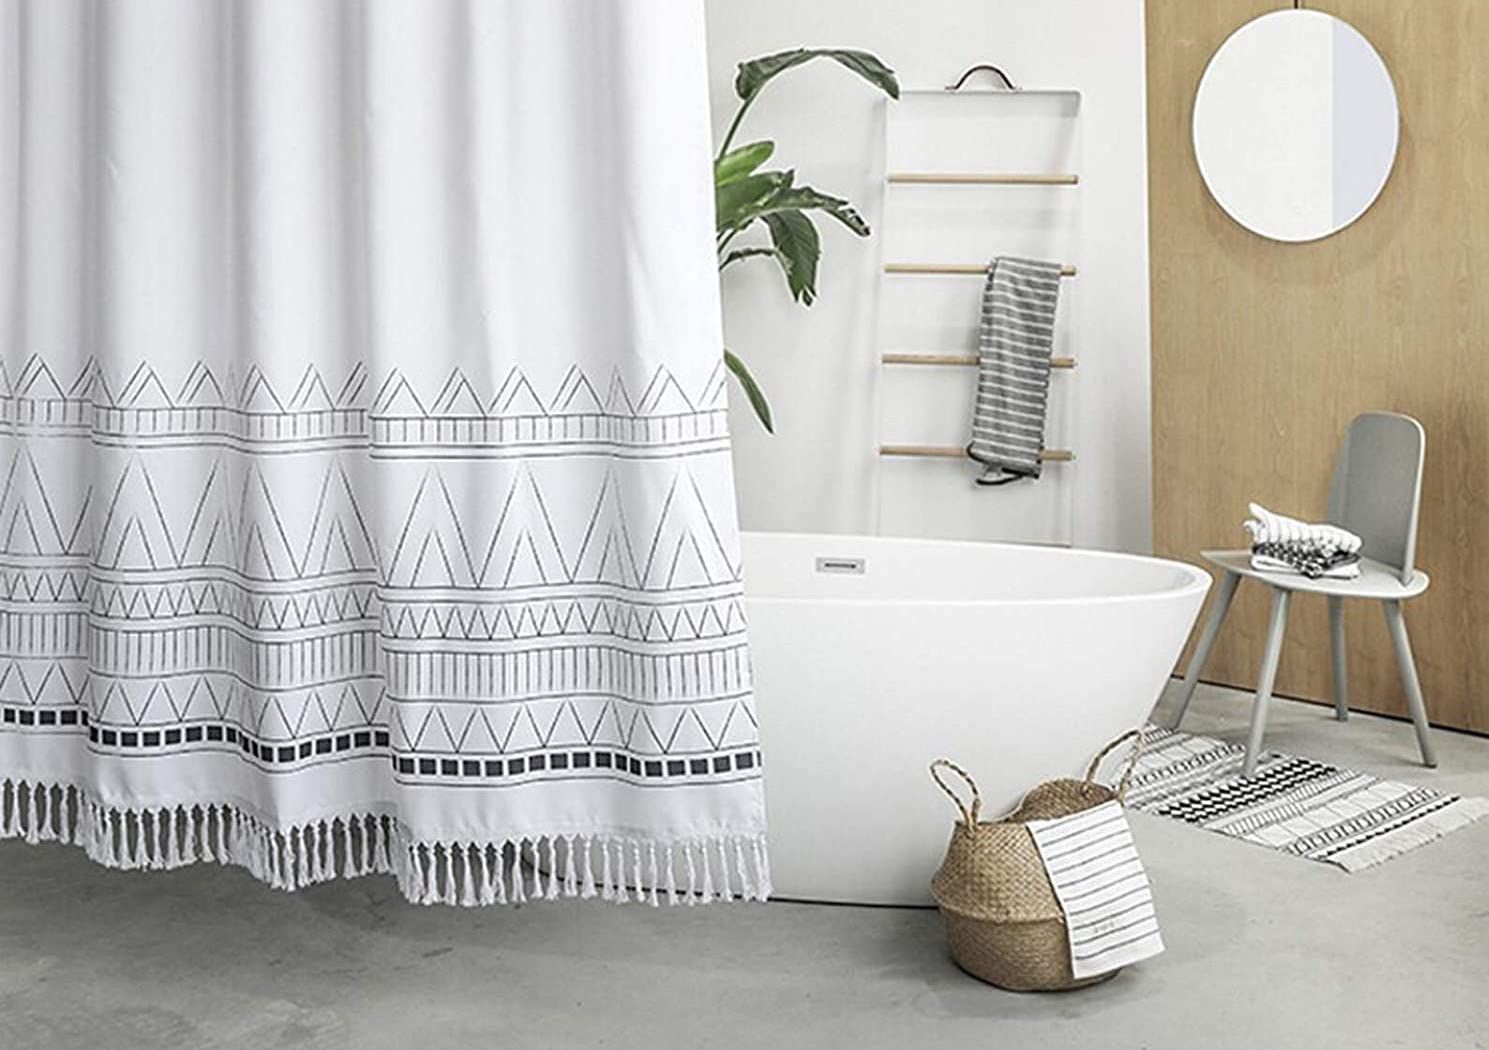 19 Best Shower Curtains 2022 The, What Are Hotel Shower Curtains Made Of